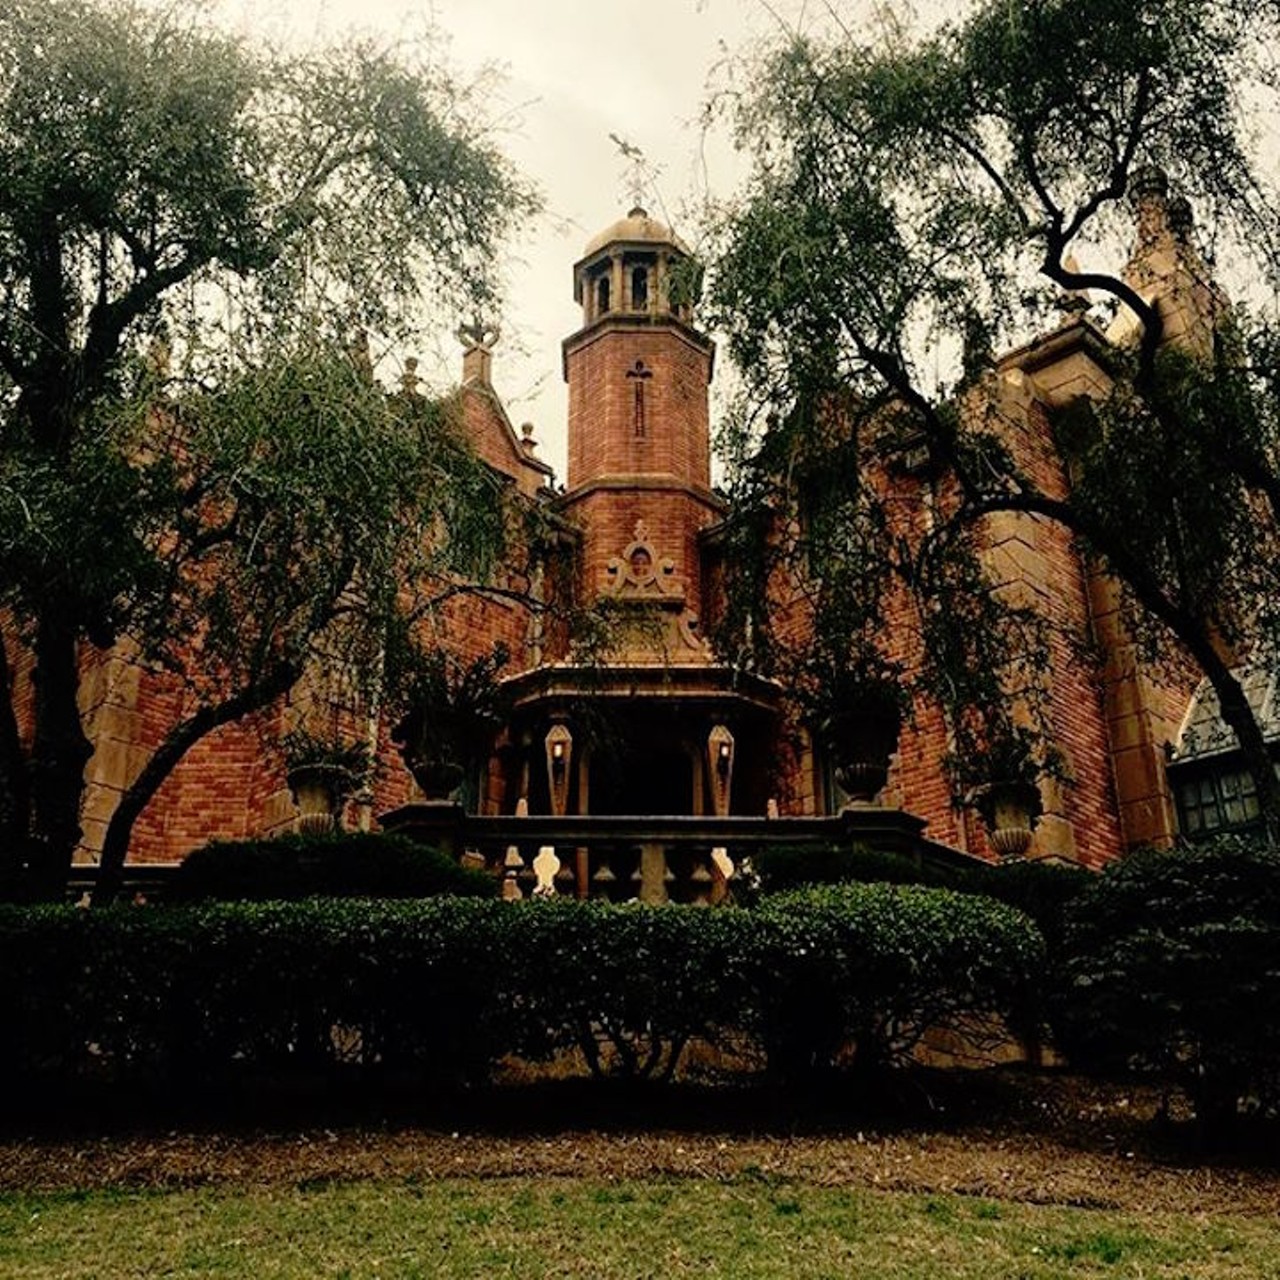 17. The Haunted Mansion
Because nothing will get your inner goth going like a rendition of "Grim Grinning Ghosts."
Photo via lil_larso/Instagram